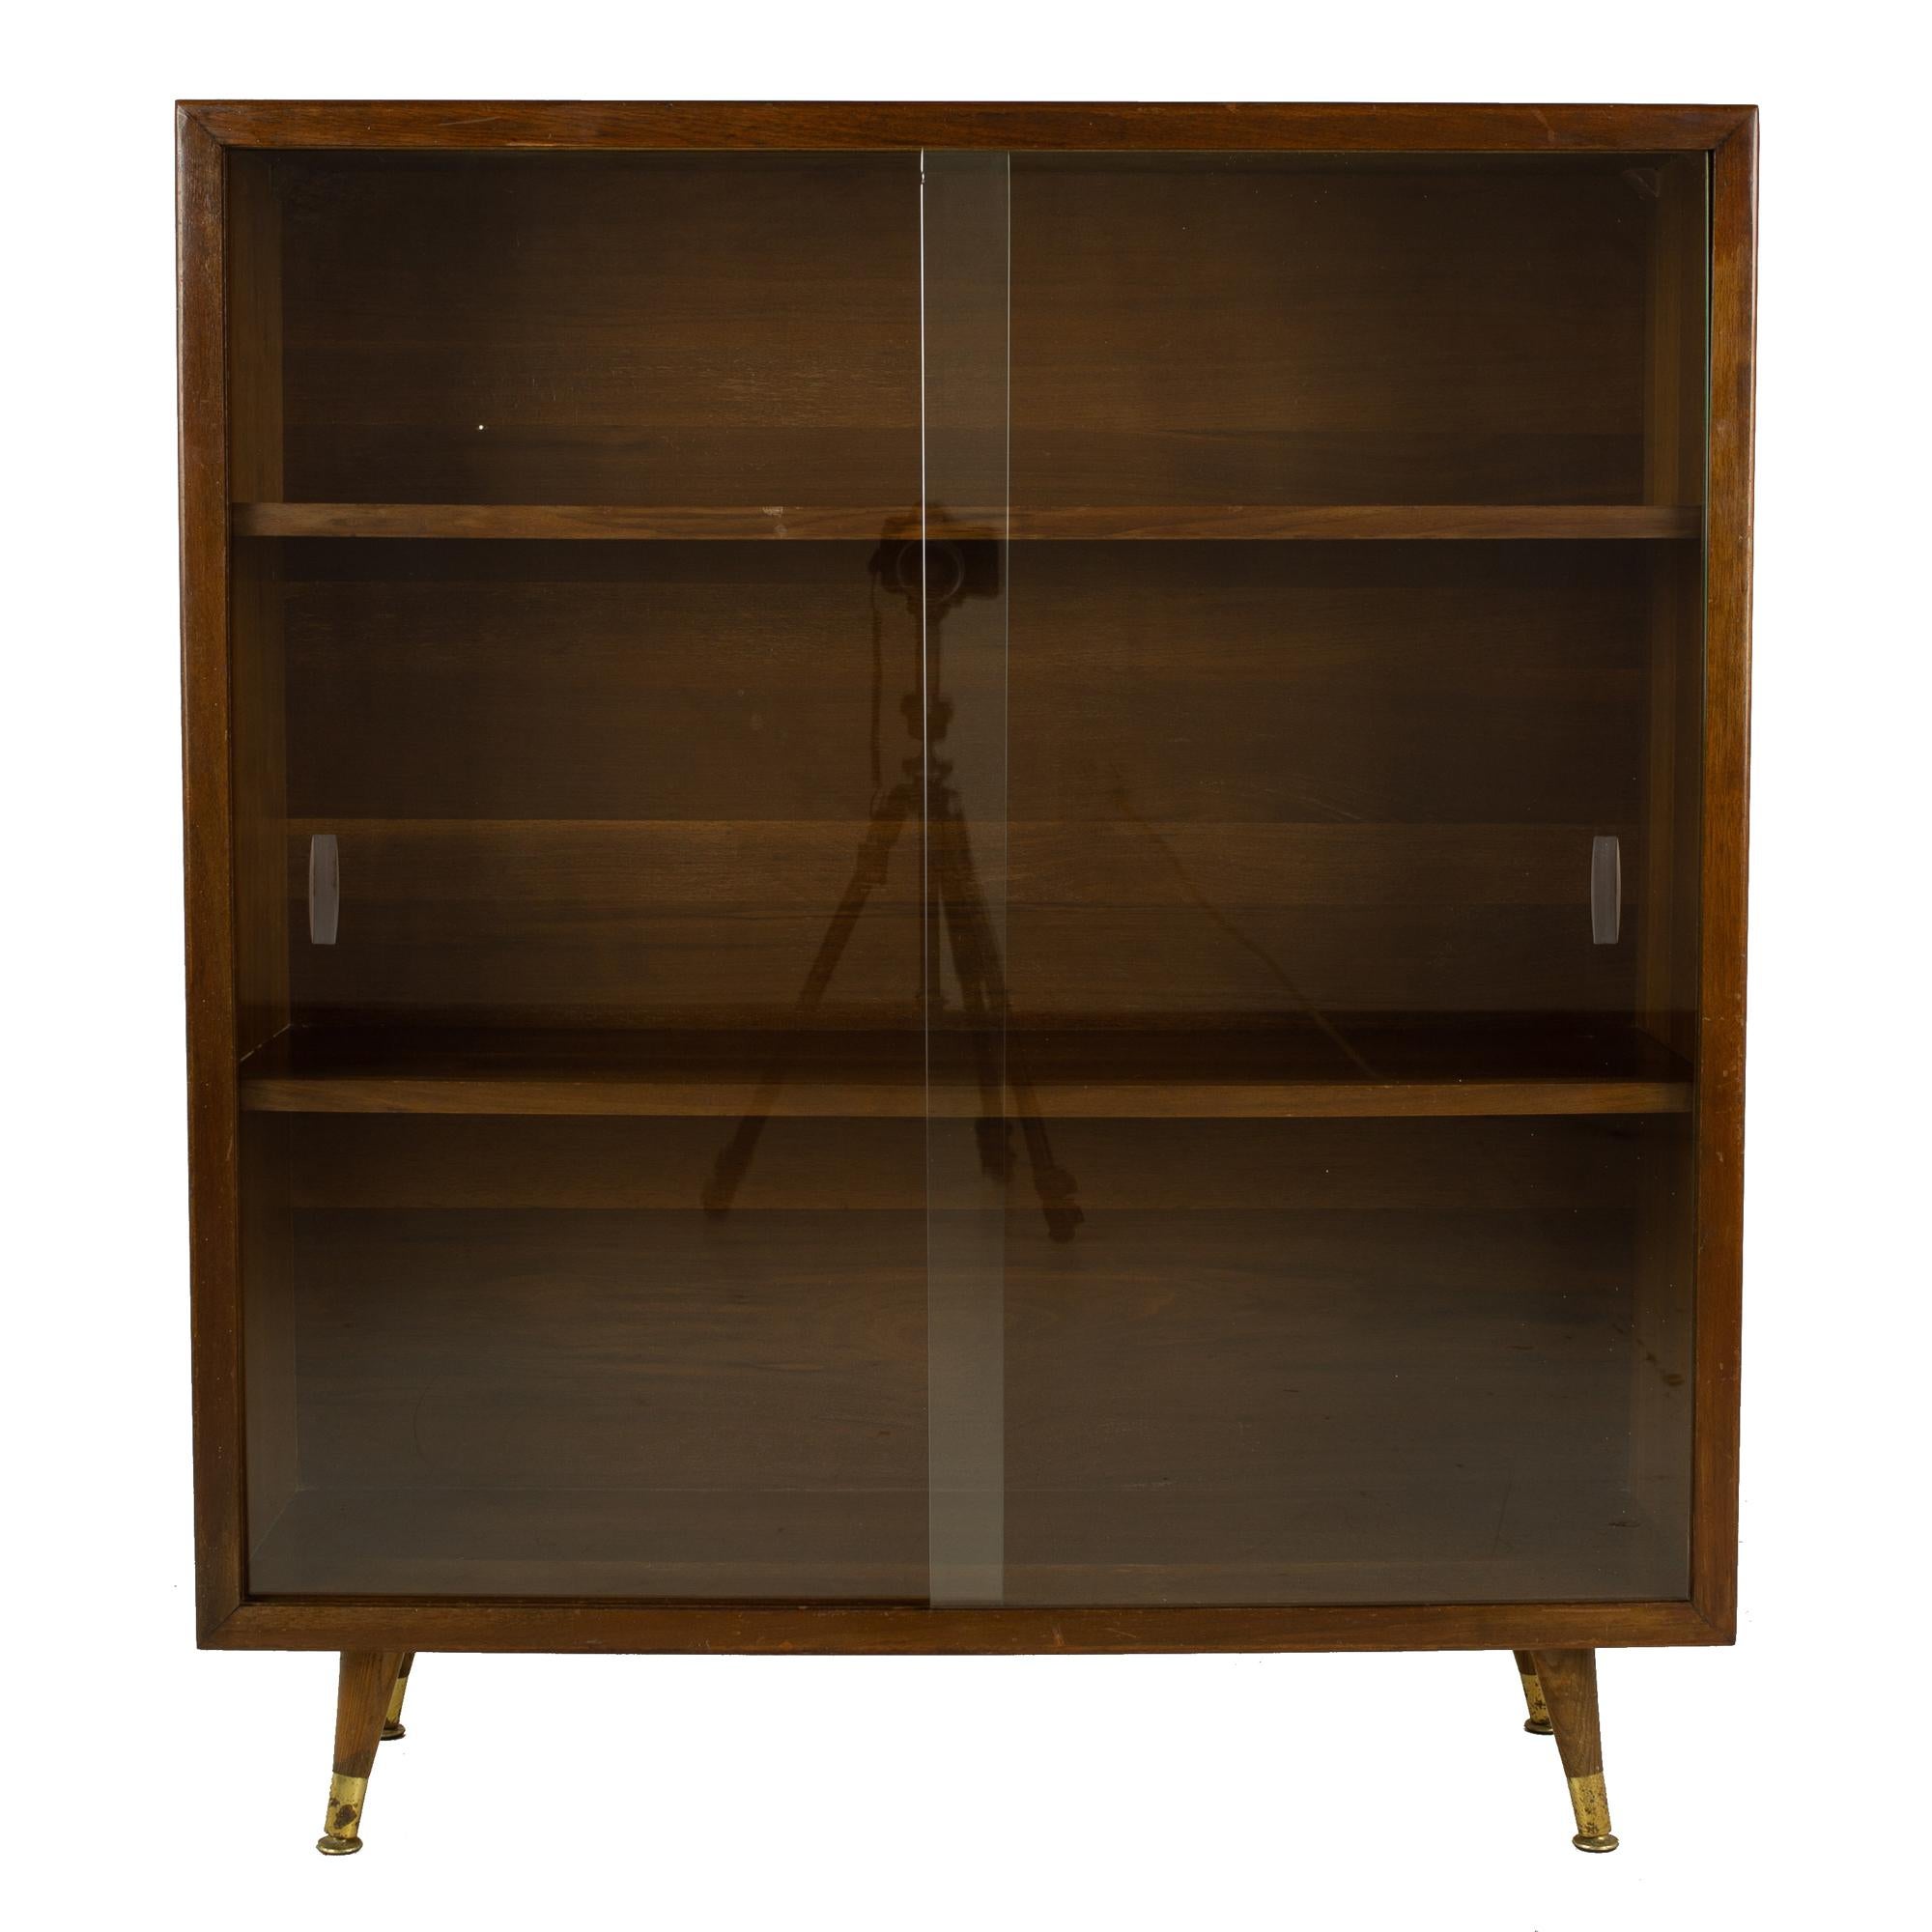 Mid century walnut bookcase

Bookcase measures: 36 wide x 11.5 deep x 41 inches high

?All pieces of furniture can be had in what we call restored vintage condition. That means the piece is restored upon purchase so it’s free of watermarks,